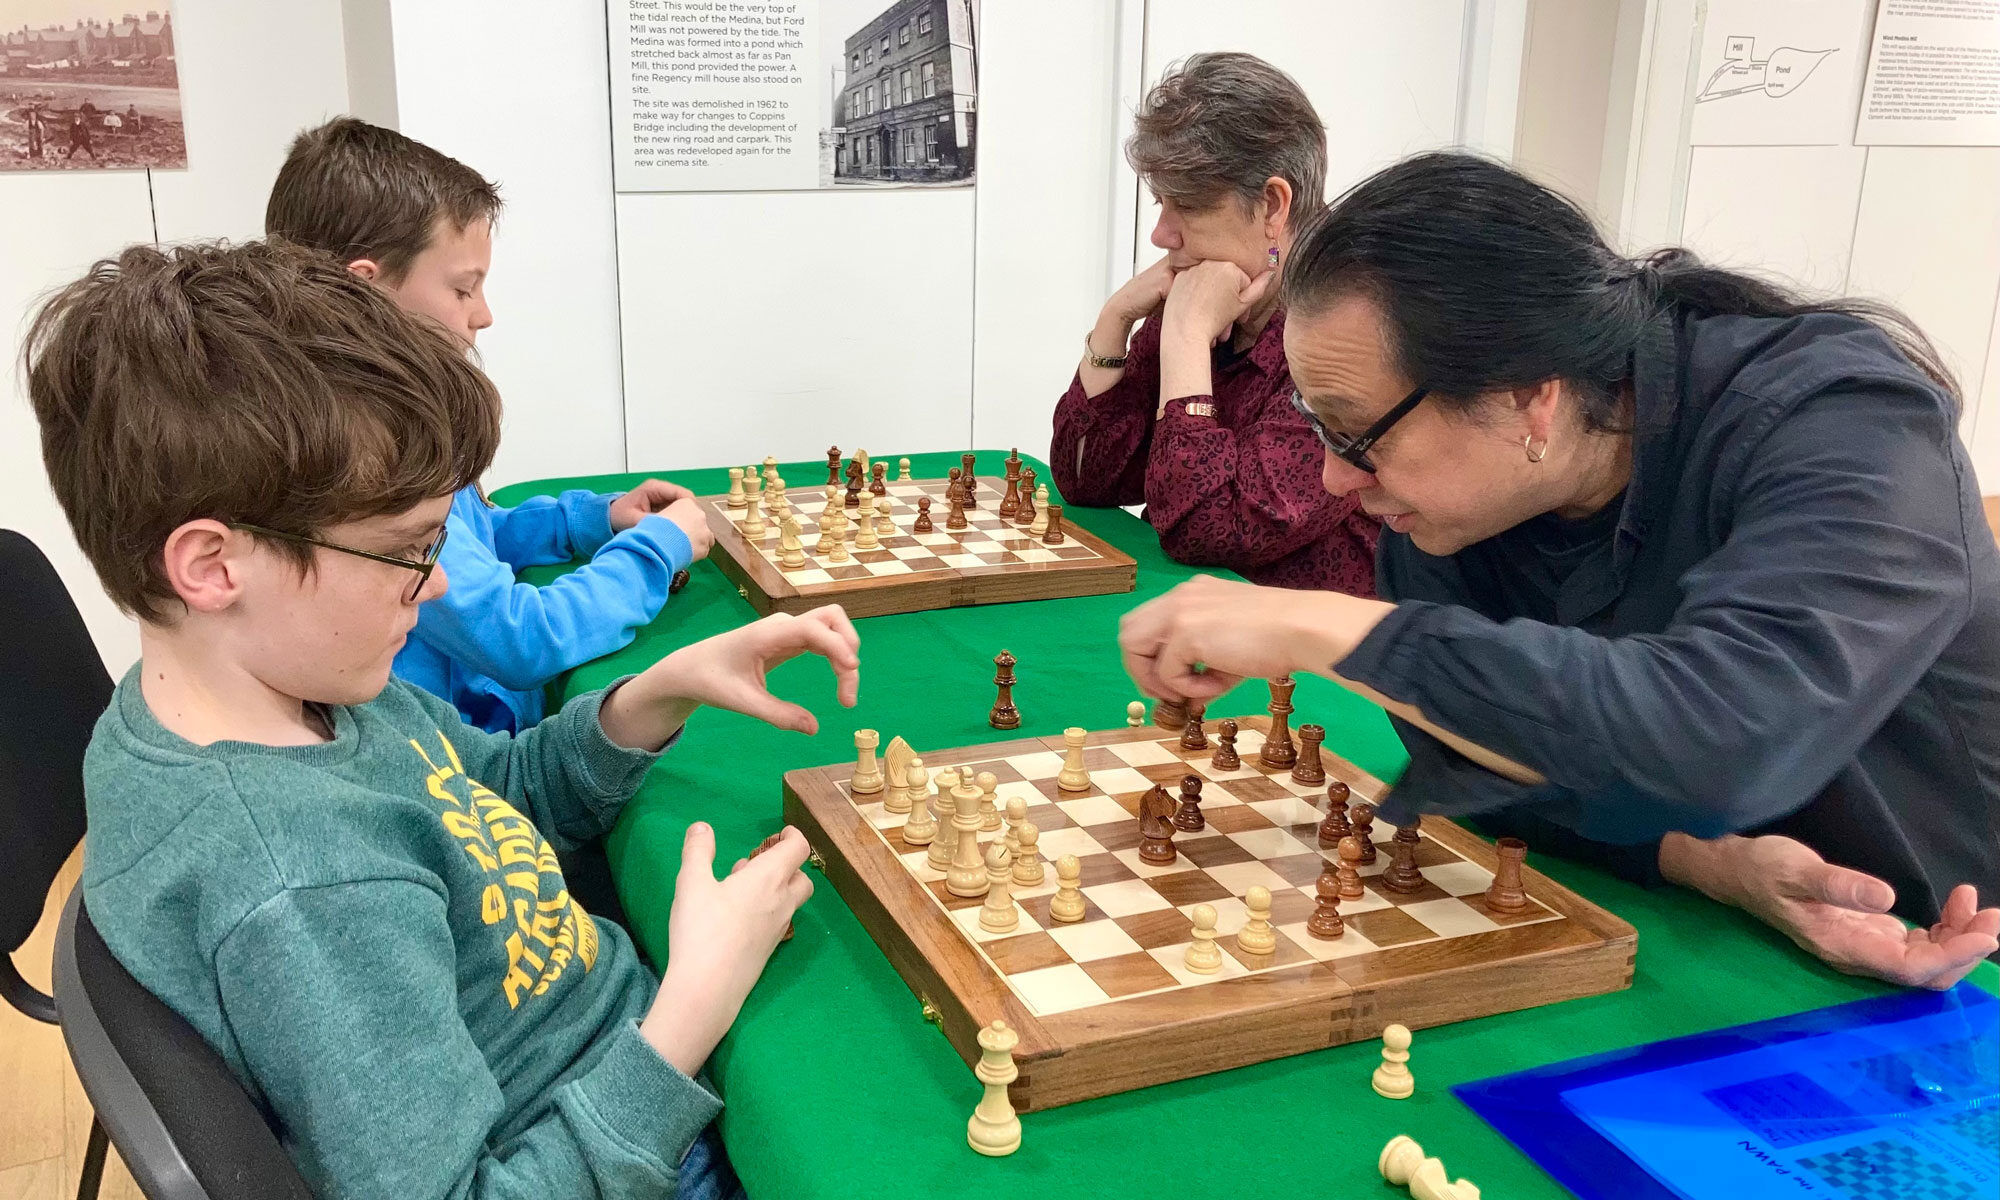 Adult and child playing chess